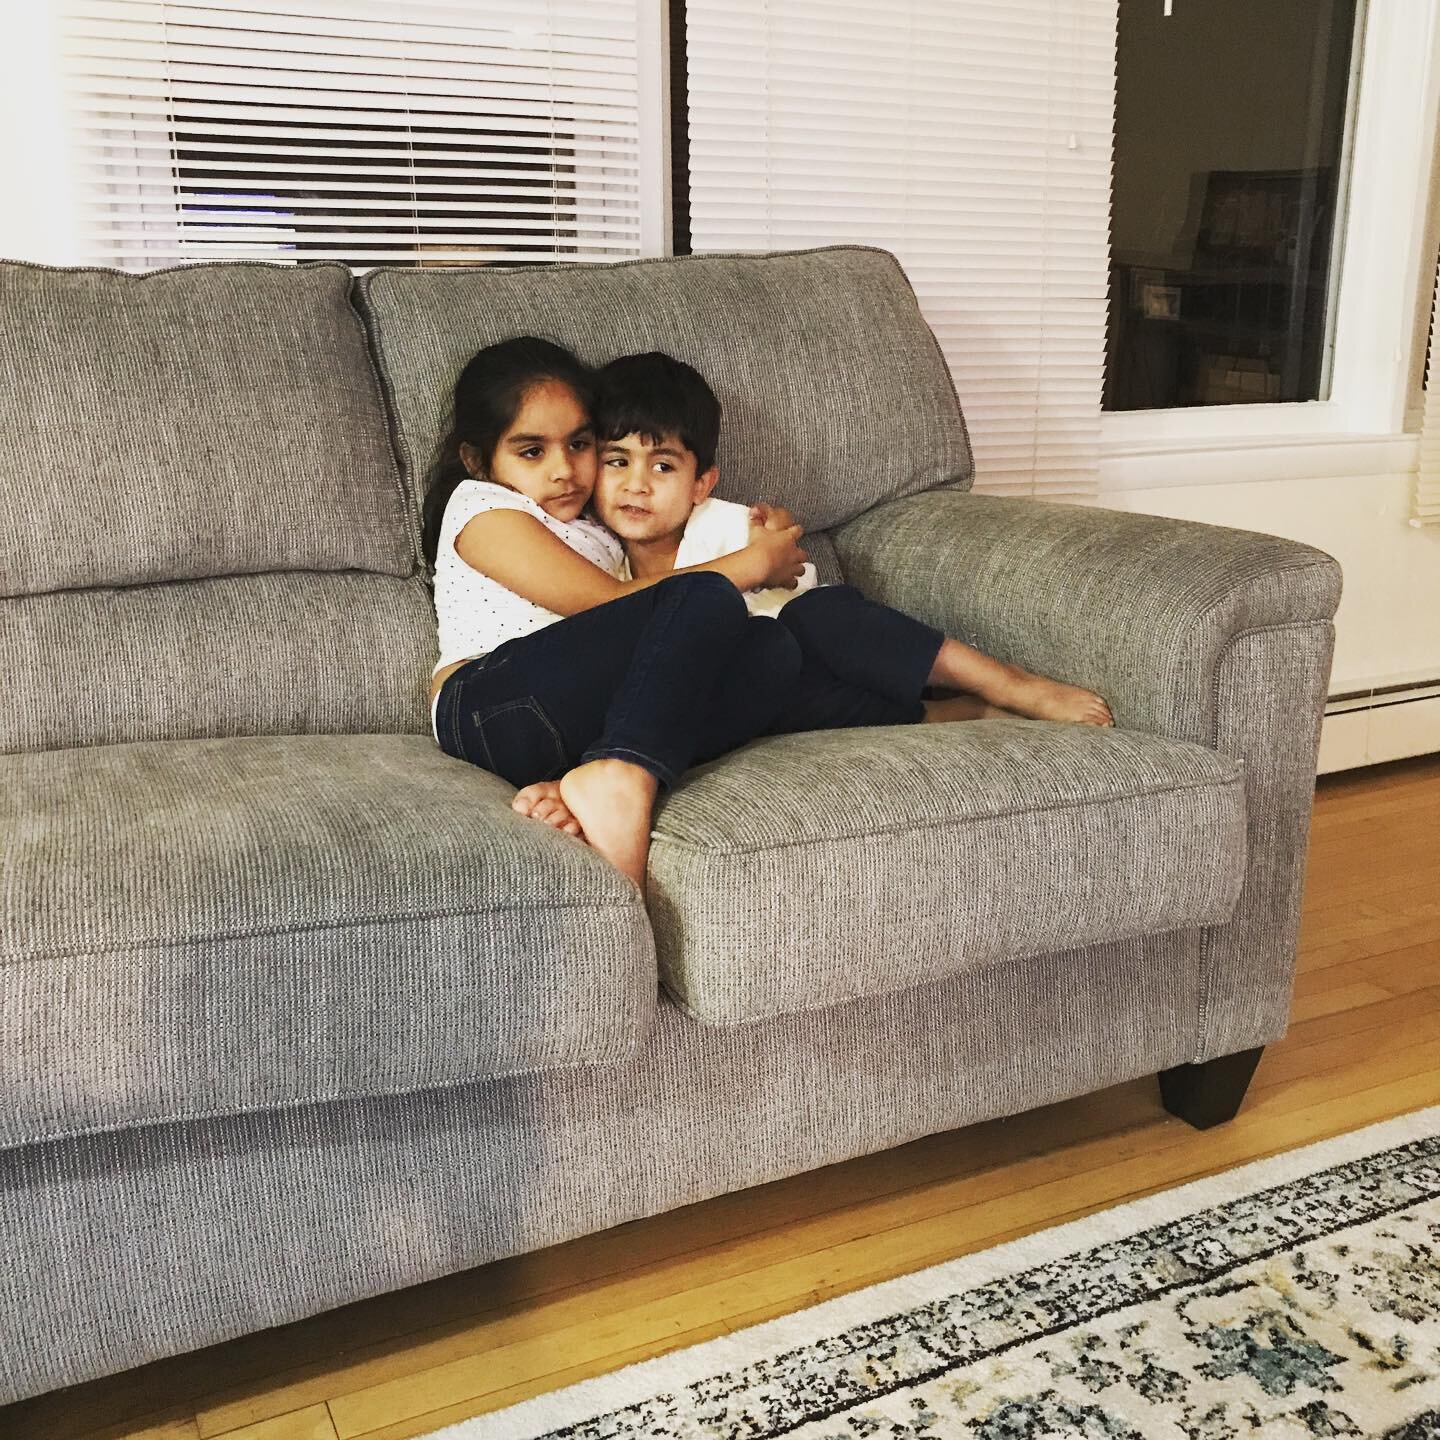 Sibling love at its natural best. 
You both are growing up together with so much love. 
You make your own games.
You marvel at things together and learn new things every day.
You share your world beautifully together. 
You take care of each other and